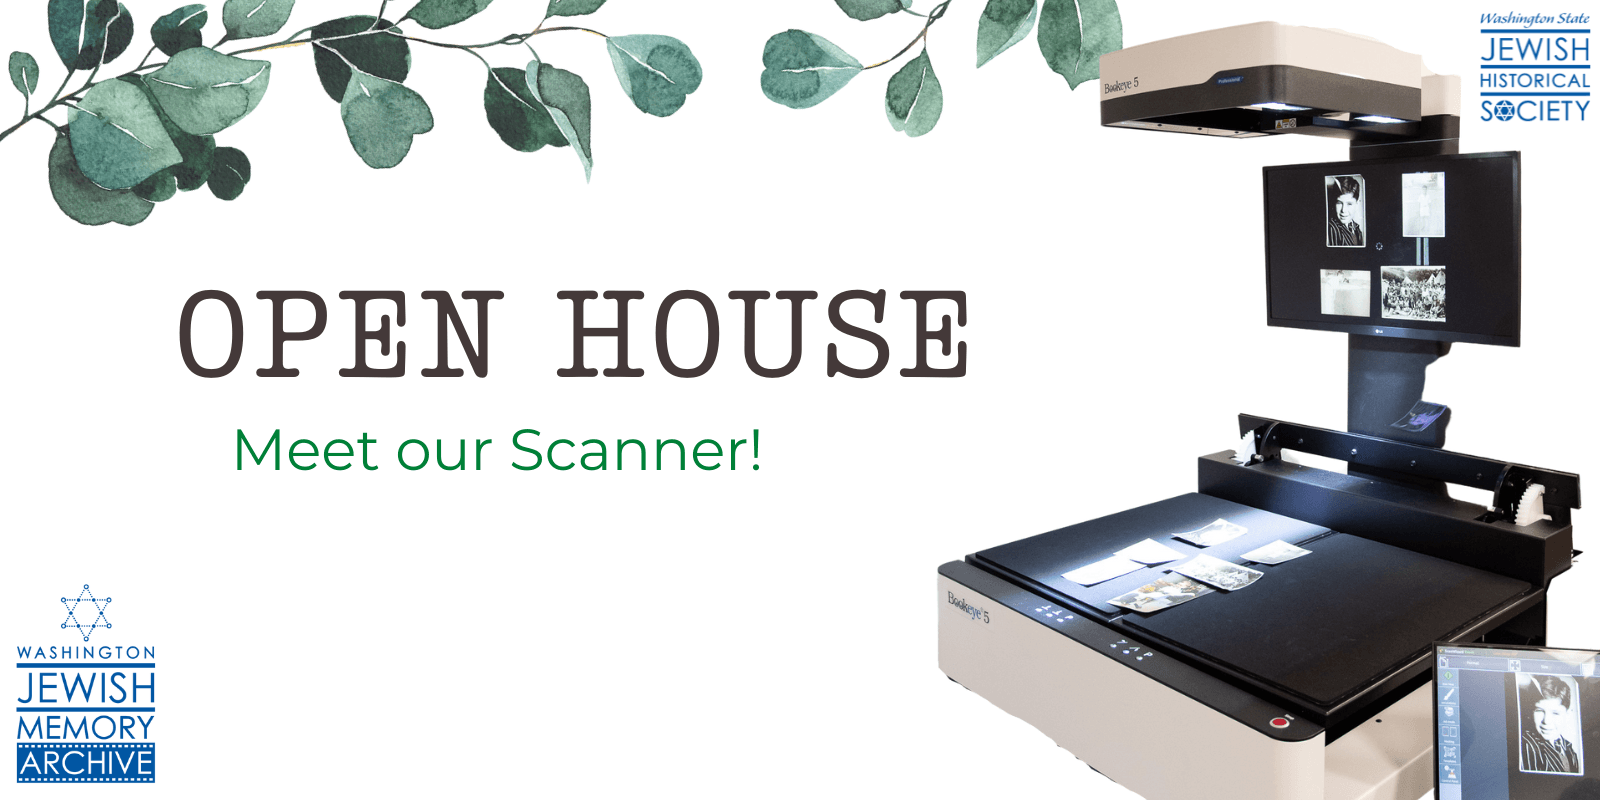 OPEN HOUSE: Meet our Scanner! Photo of archival scanner scanning photos.